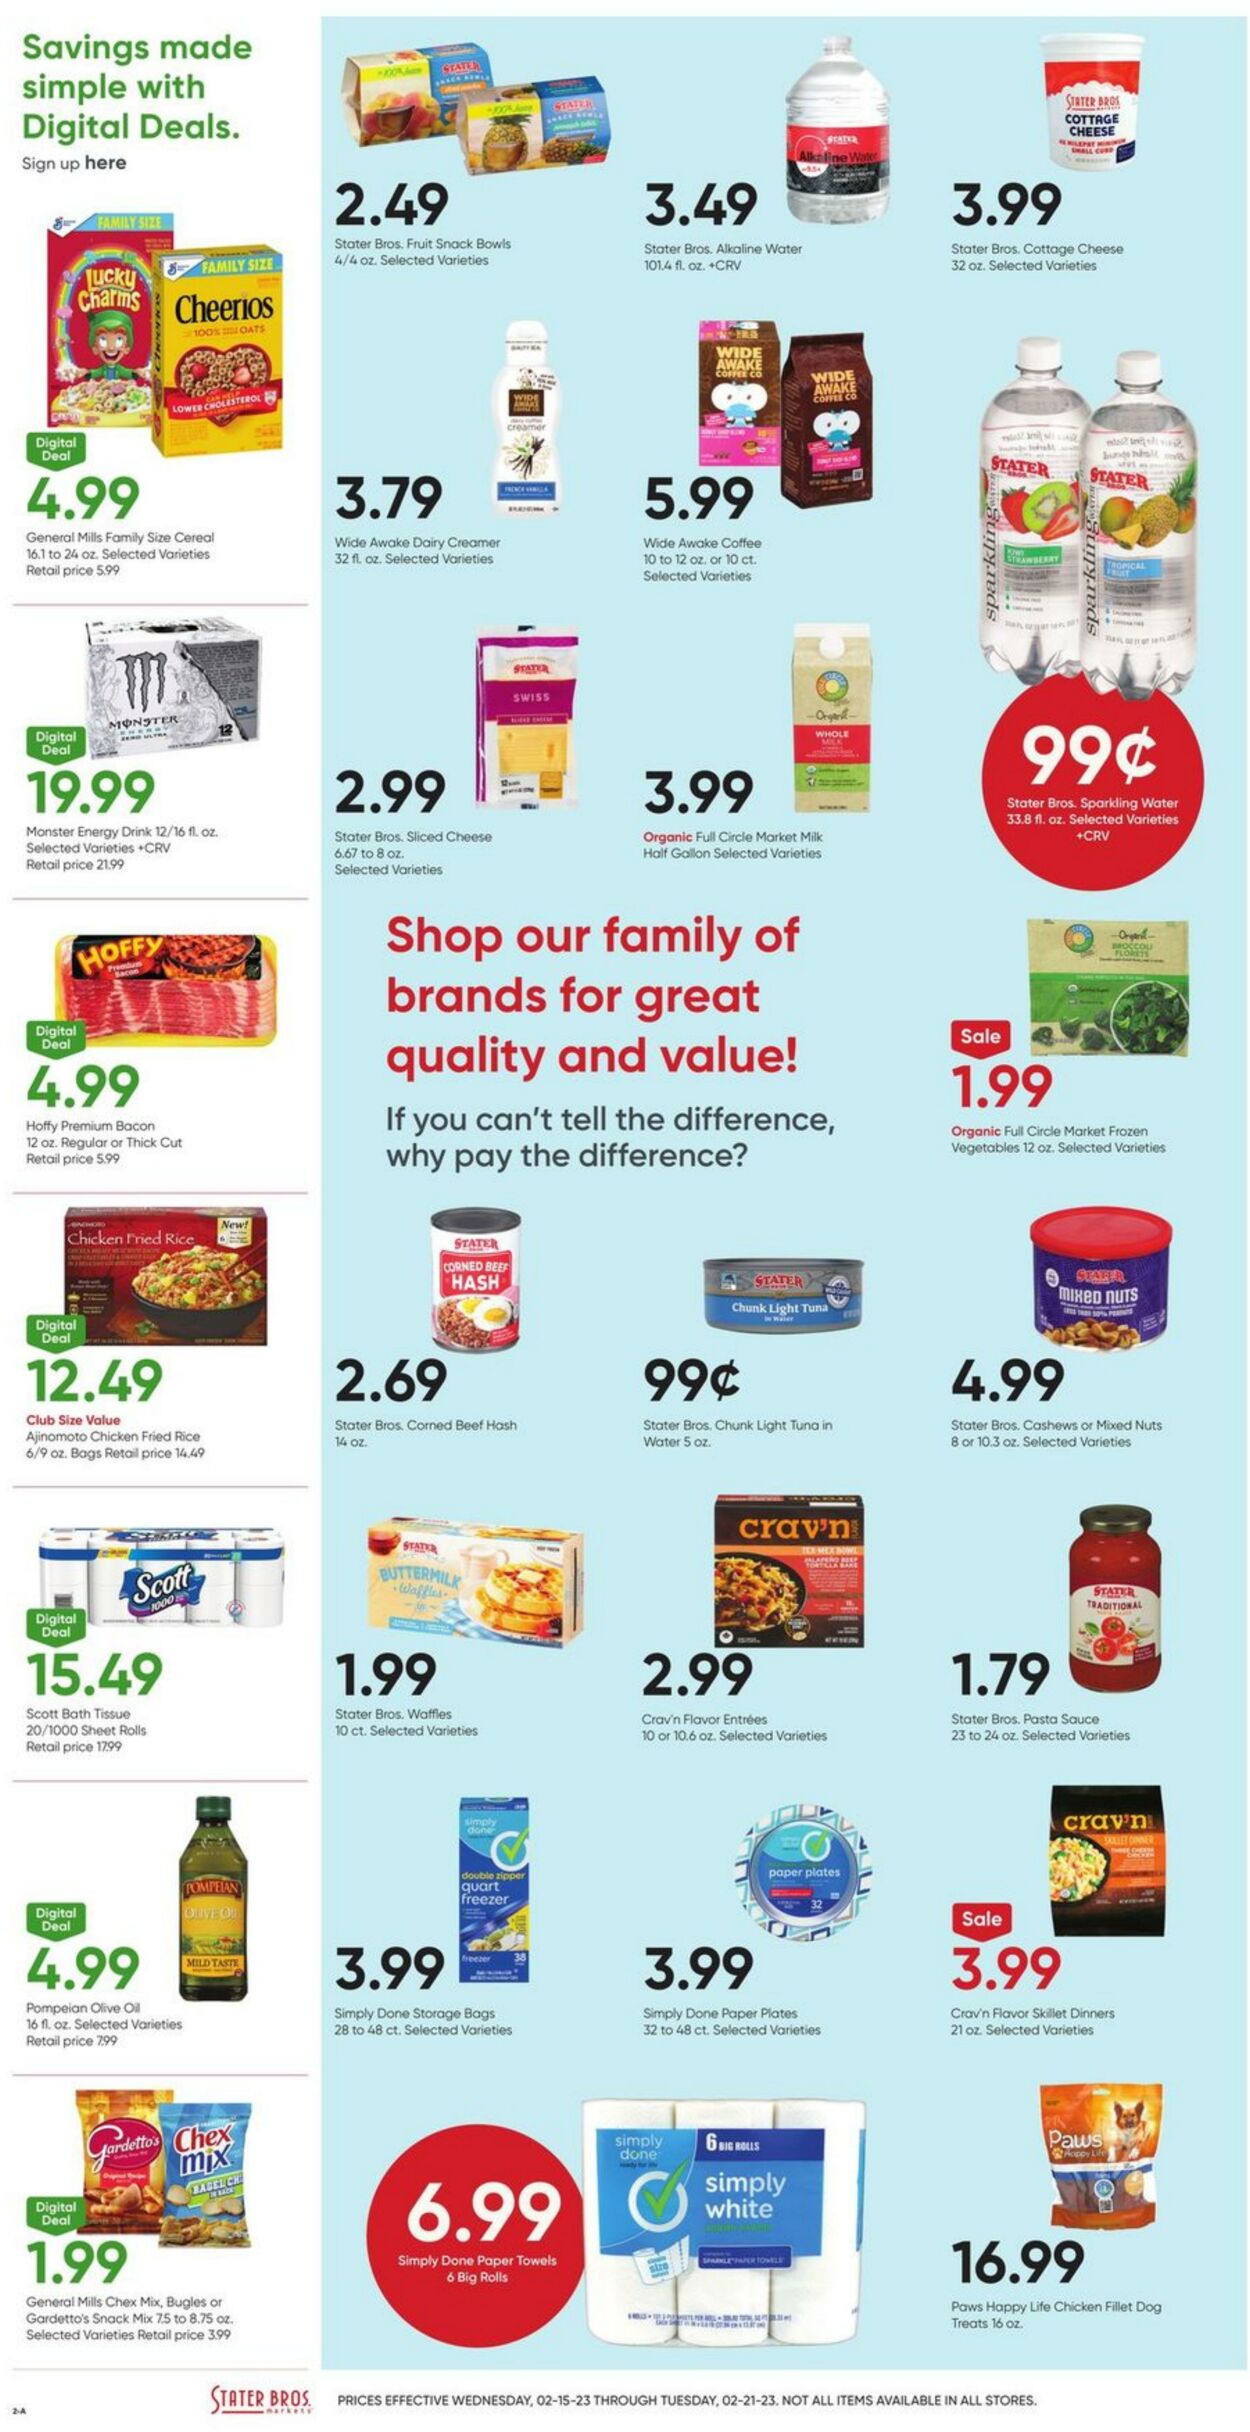 Weekly ad Stater Bros 02/15/2023 - 02/21/2023